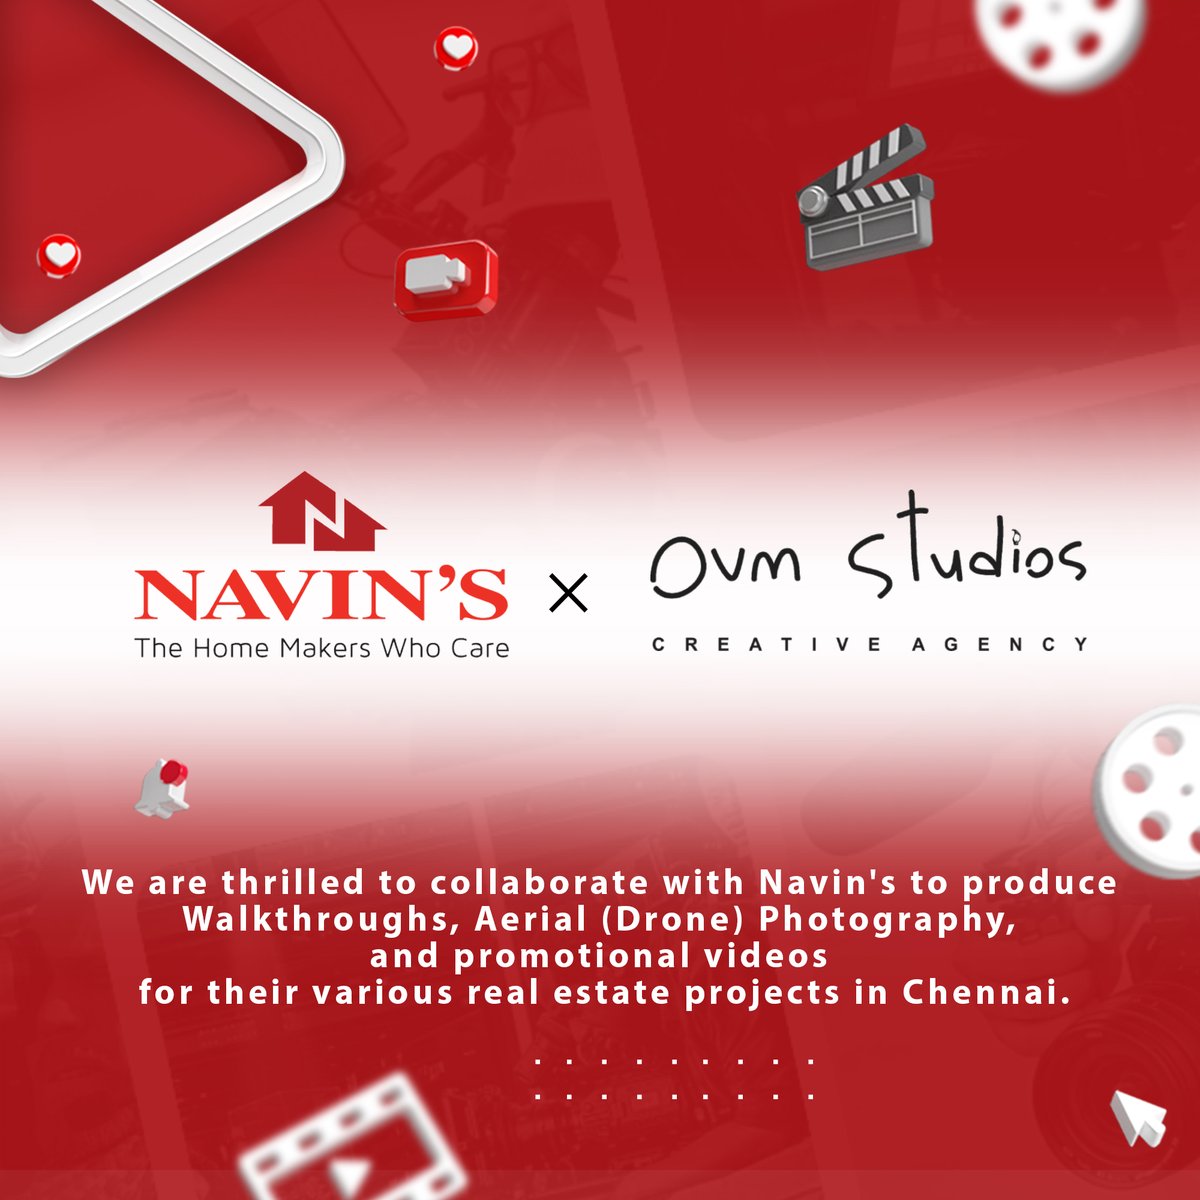 We are #excited to #collaborate with @NavinHousing to #produce #Walkthroughs, #Aerial (#Drone) #Photography, and #promotional #videos for their #various #realestate #projects in #Chennai.

#corporatevideo #promotional #explainervideo #videoproduction